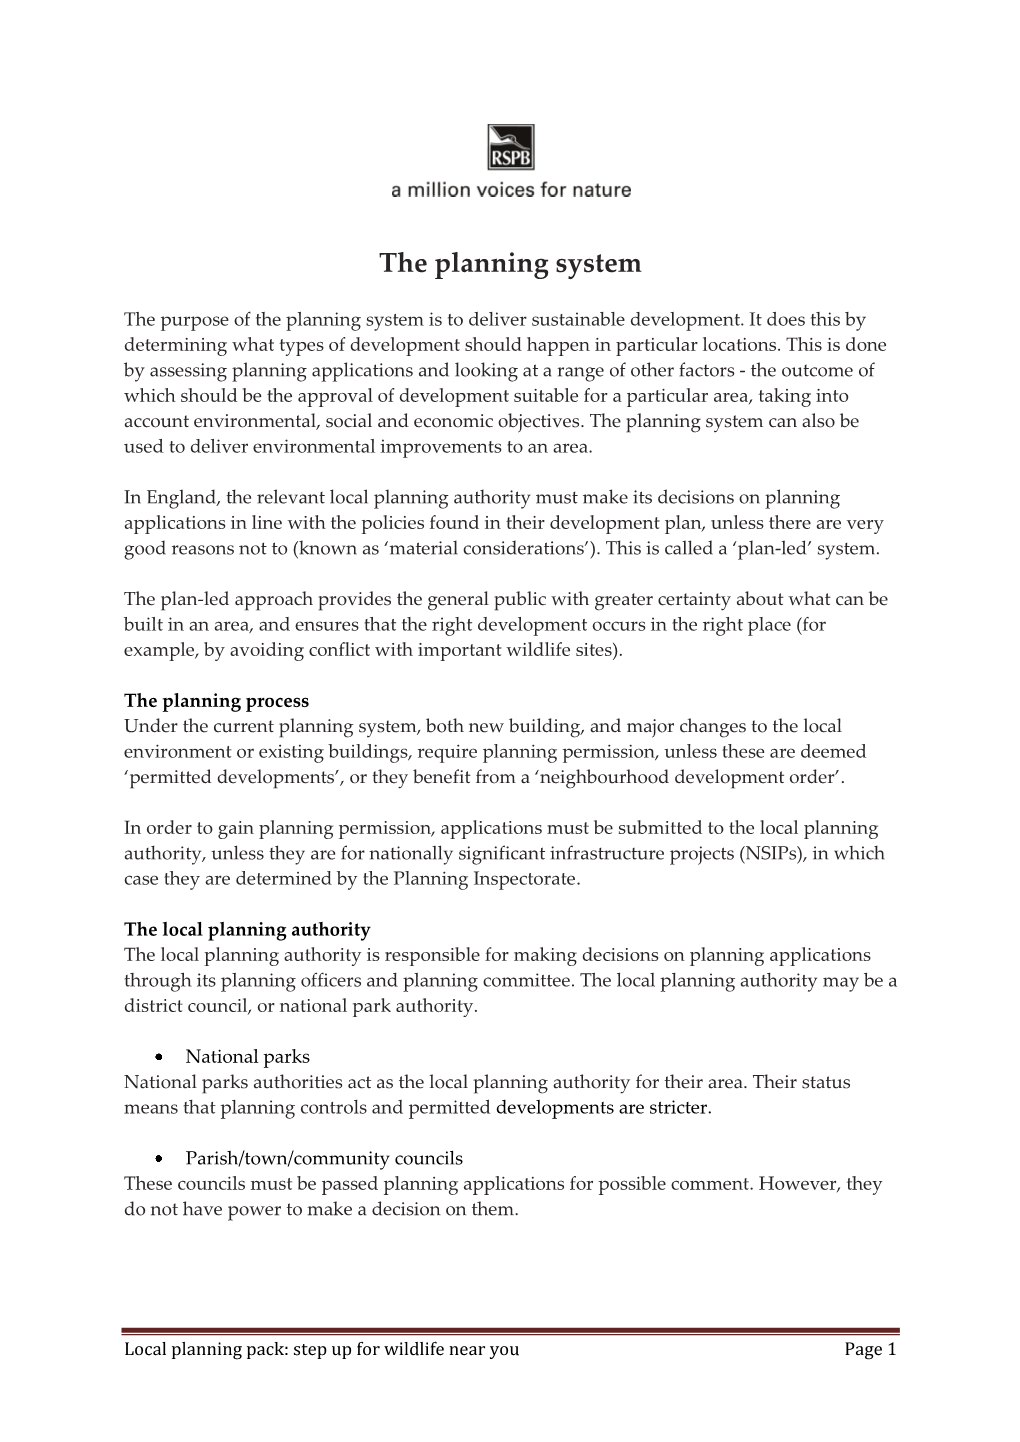 The Planning System